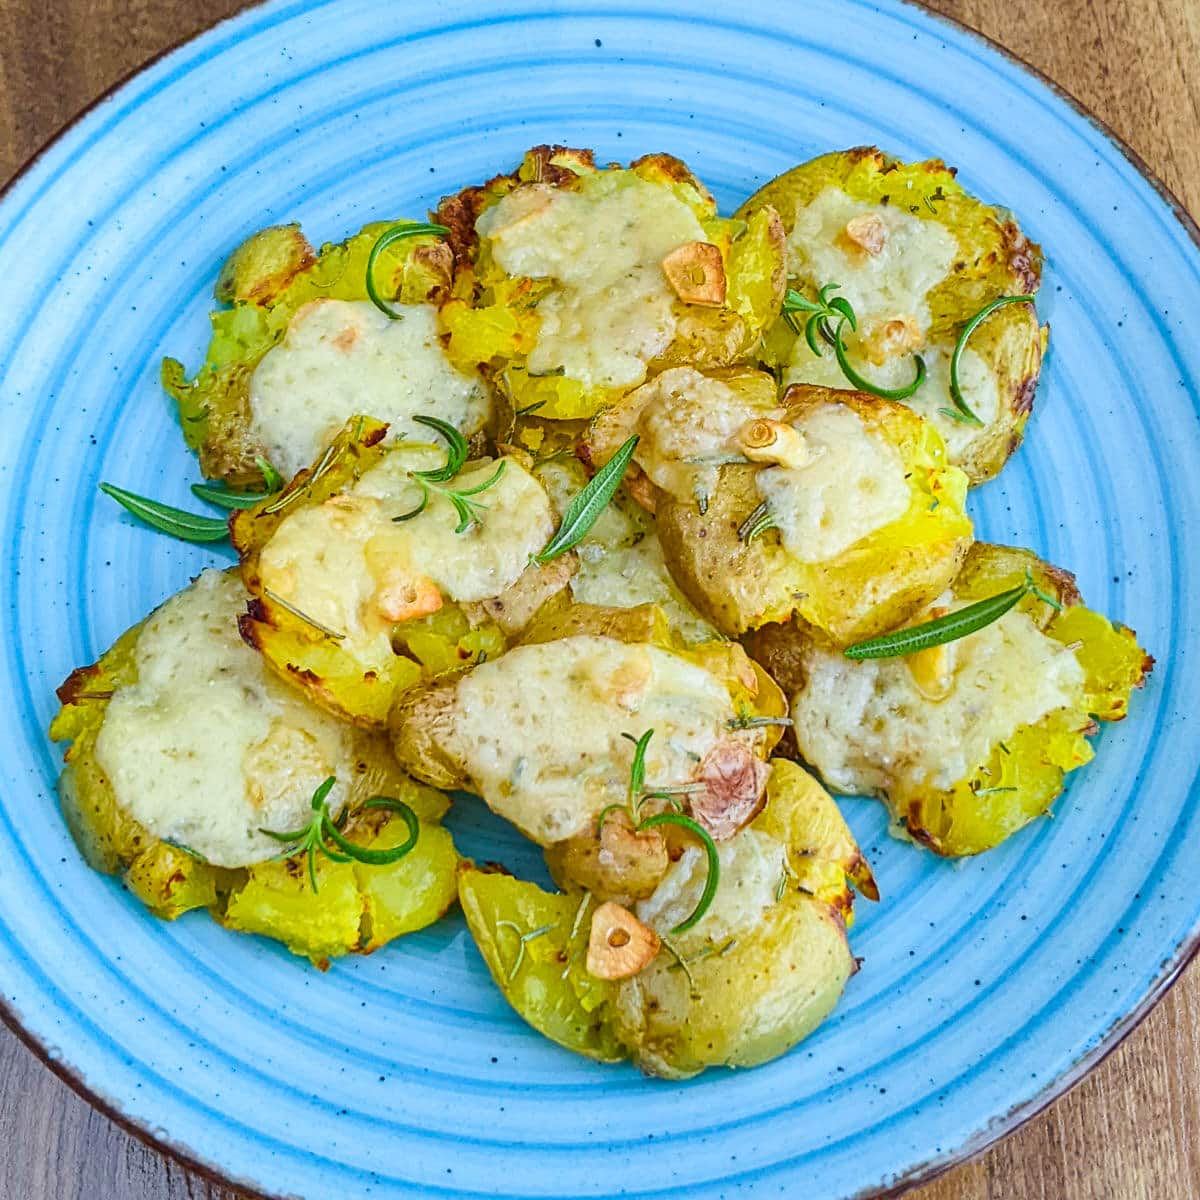 Garlicky Smashed Baby Potatoes in air fryer served on a blue plate.